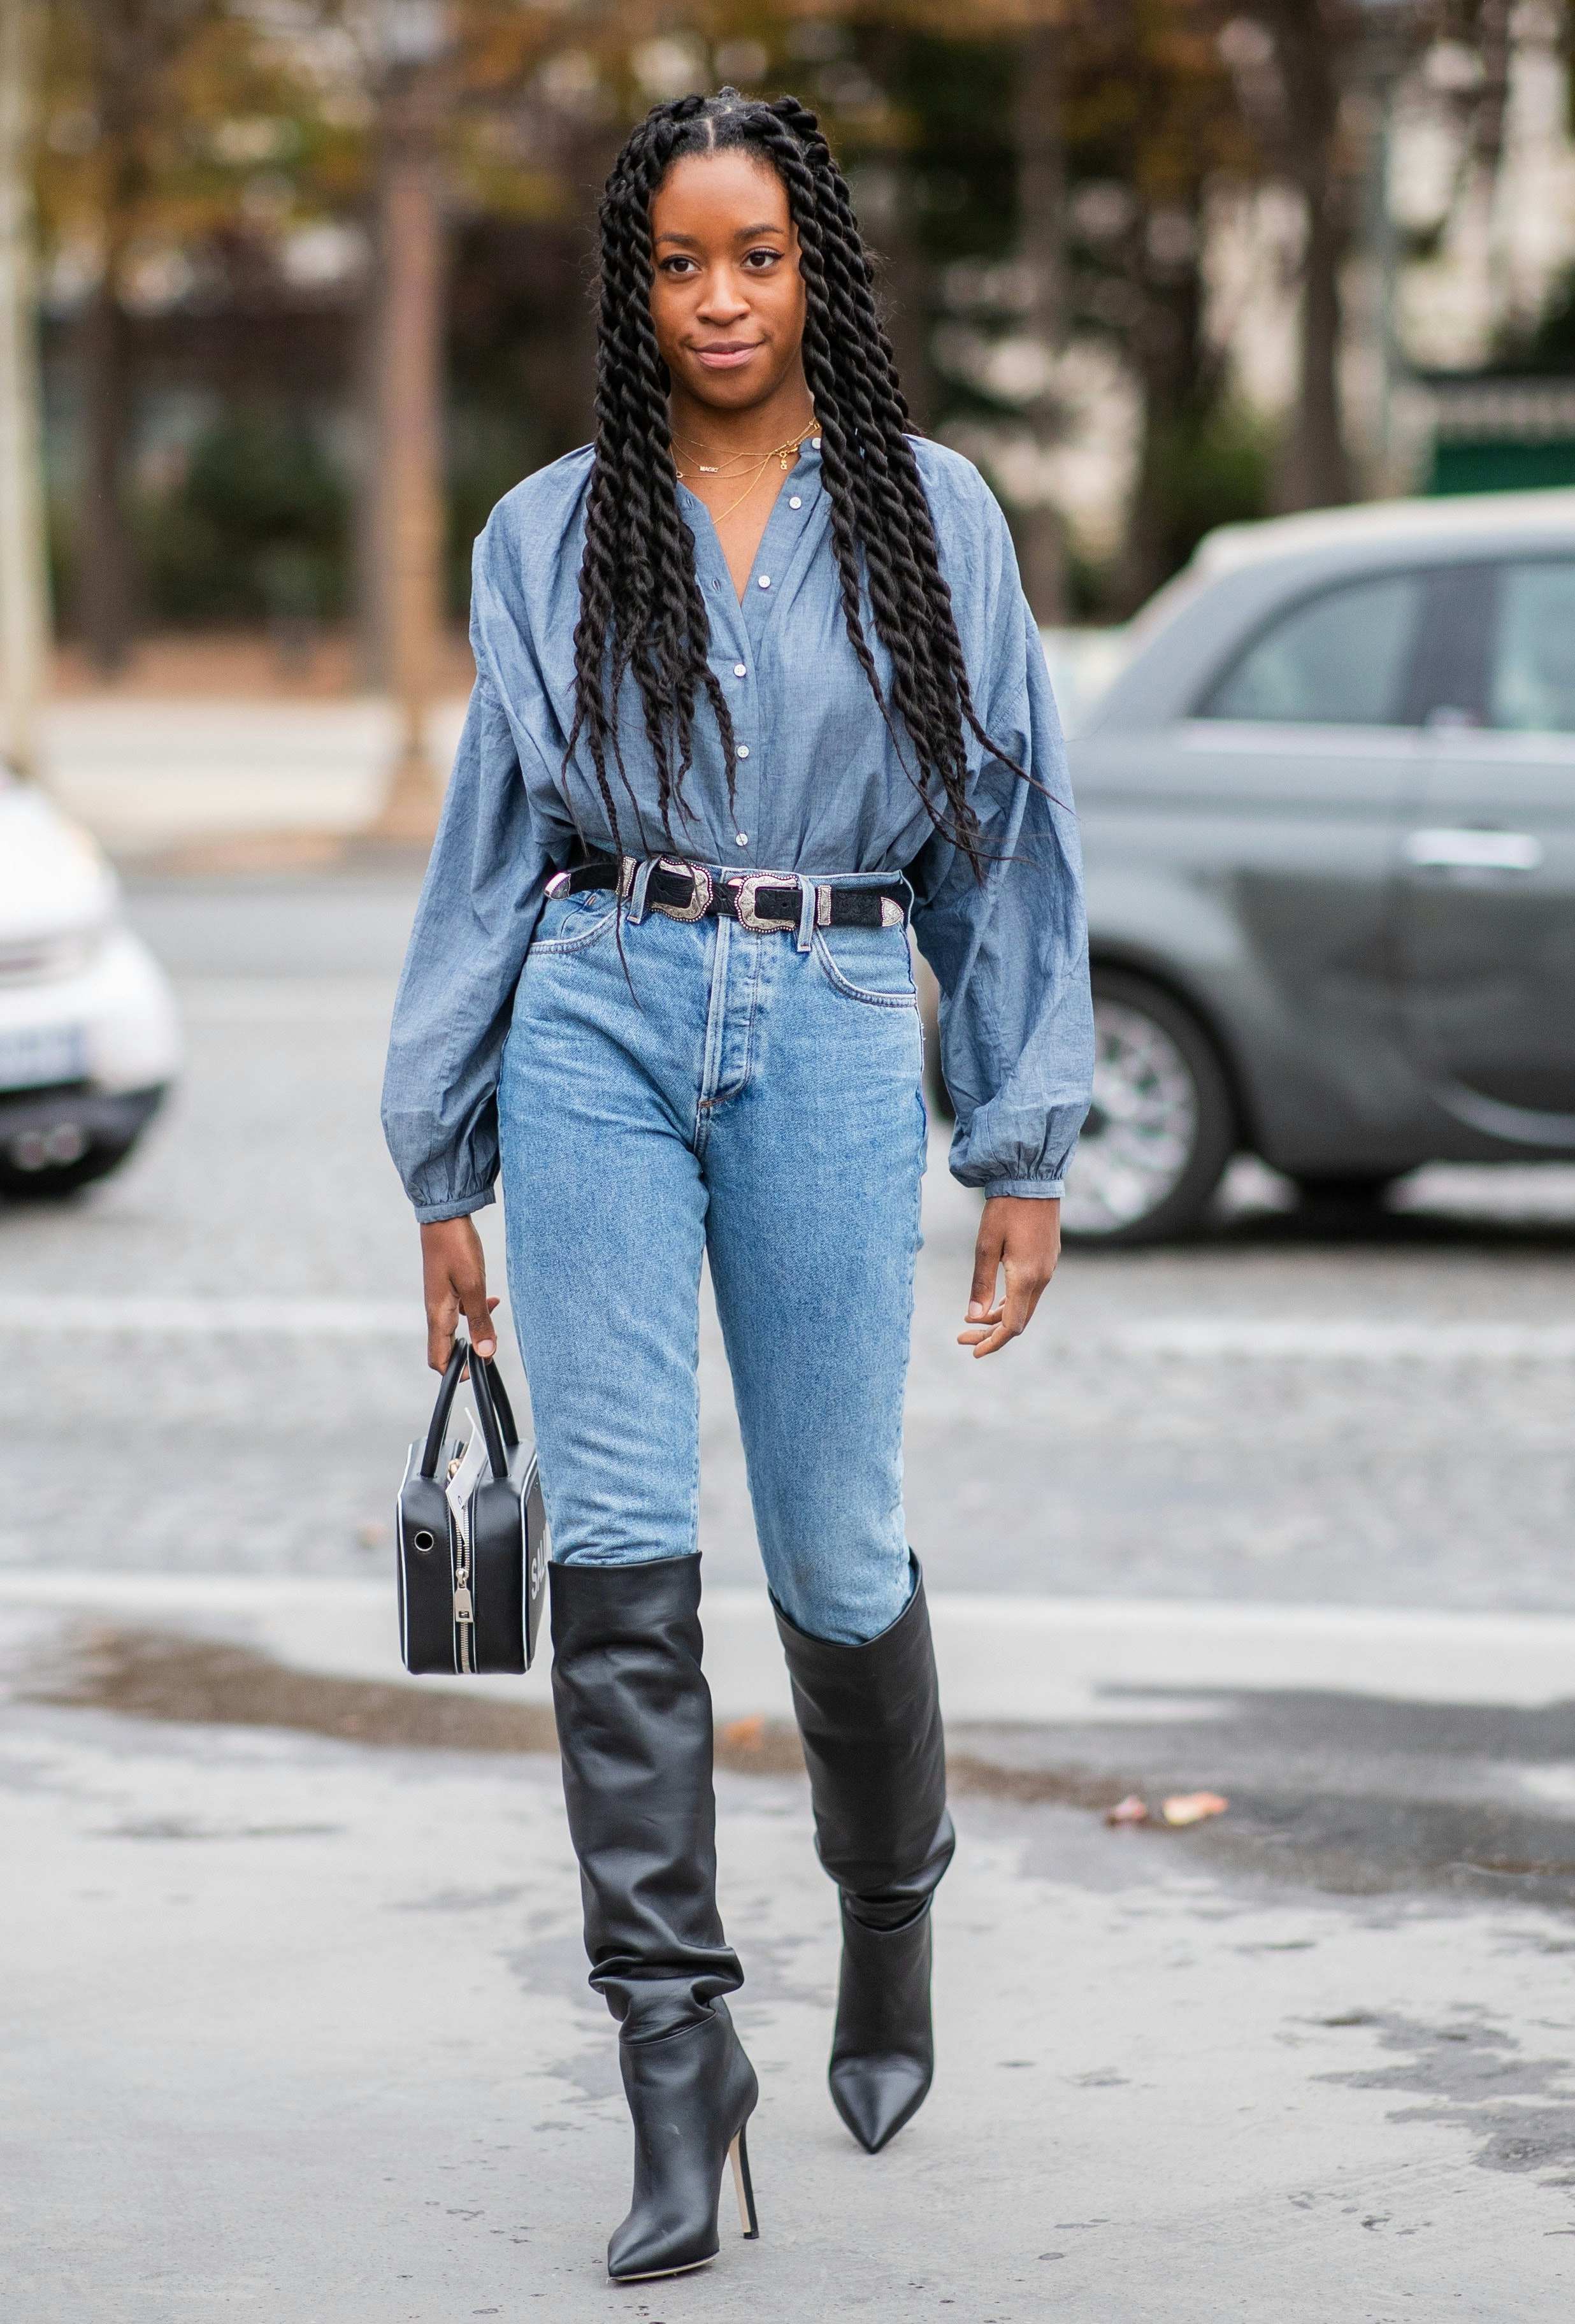 7 Surefire Signs Your Jeans Are Too Tight - Sheeba Magazine